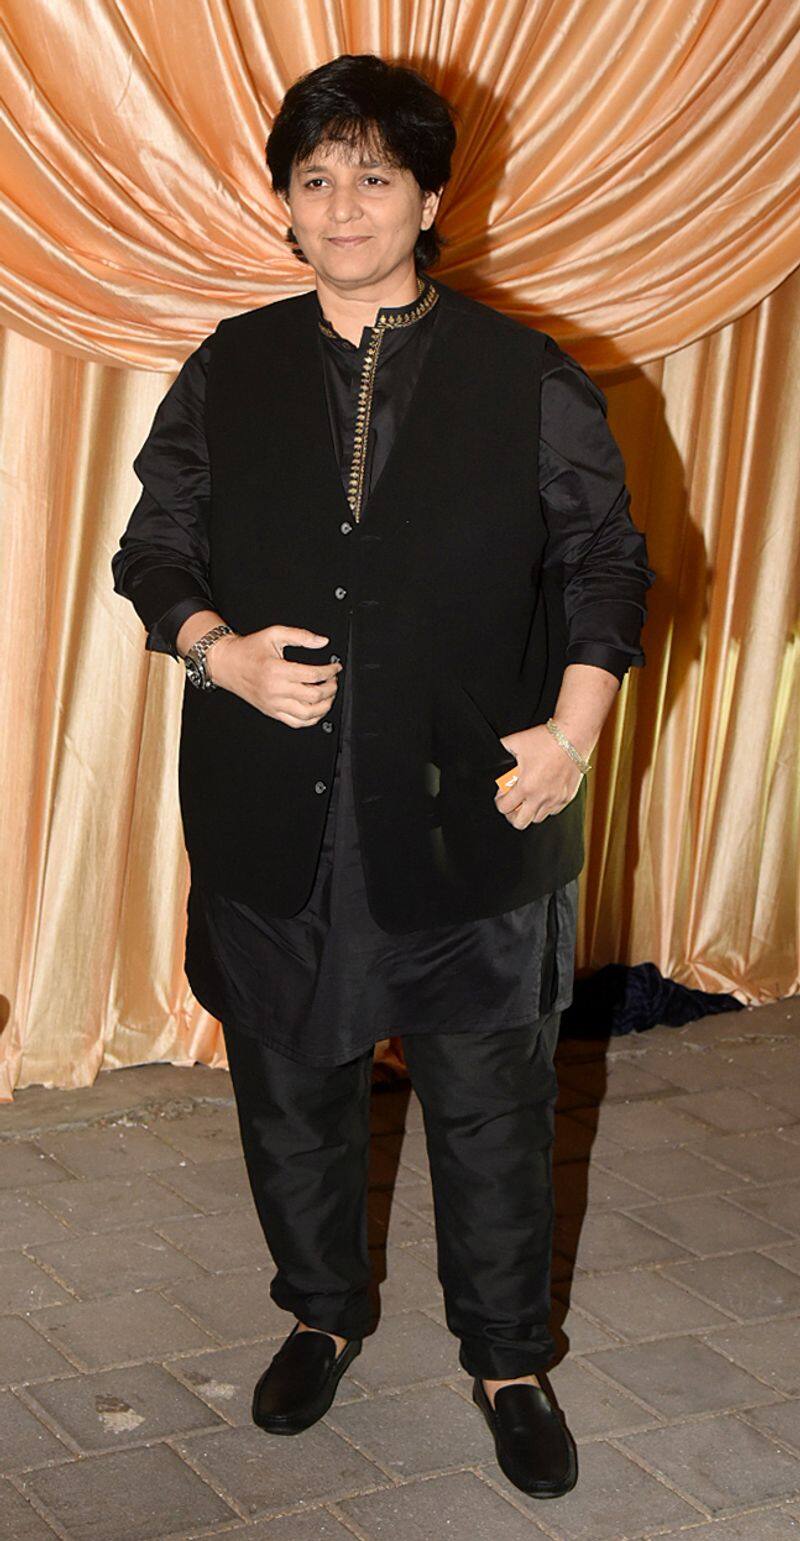 Sweet voiced Falguni Pathak looked equally sweet in her all-black outfit for the wedding reception.